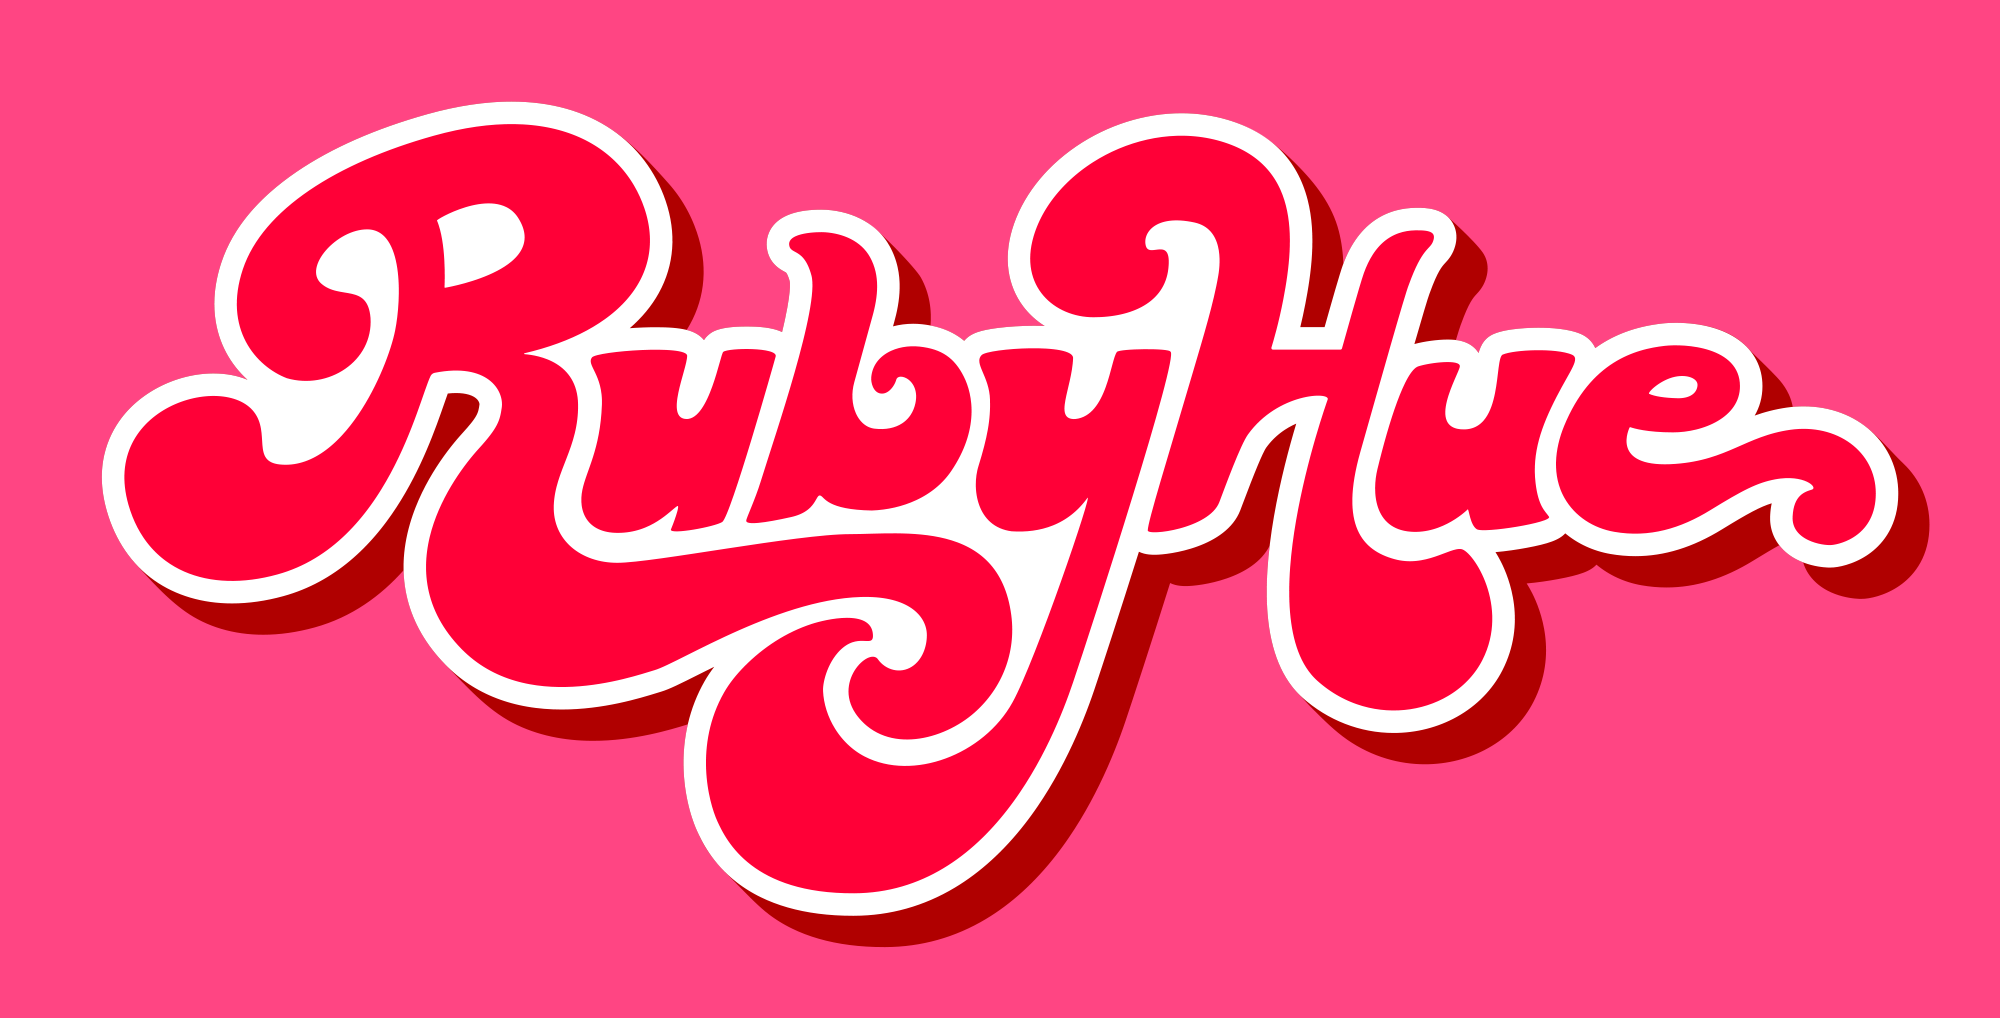 RubyHue_Identity03c.png